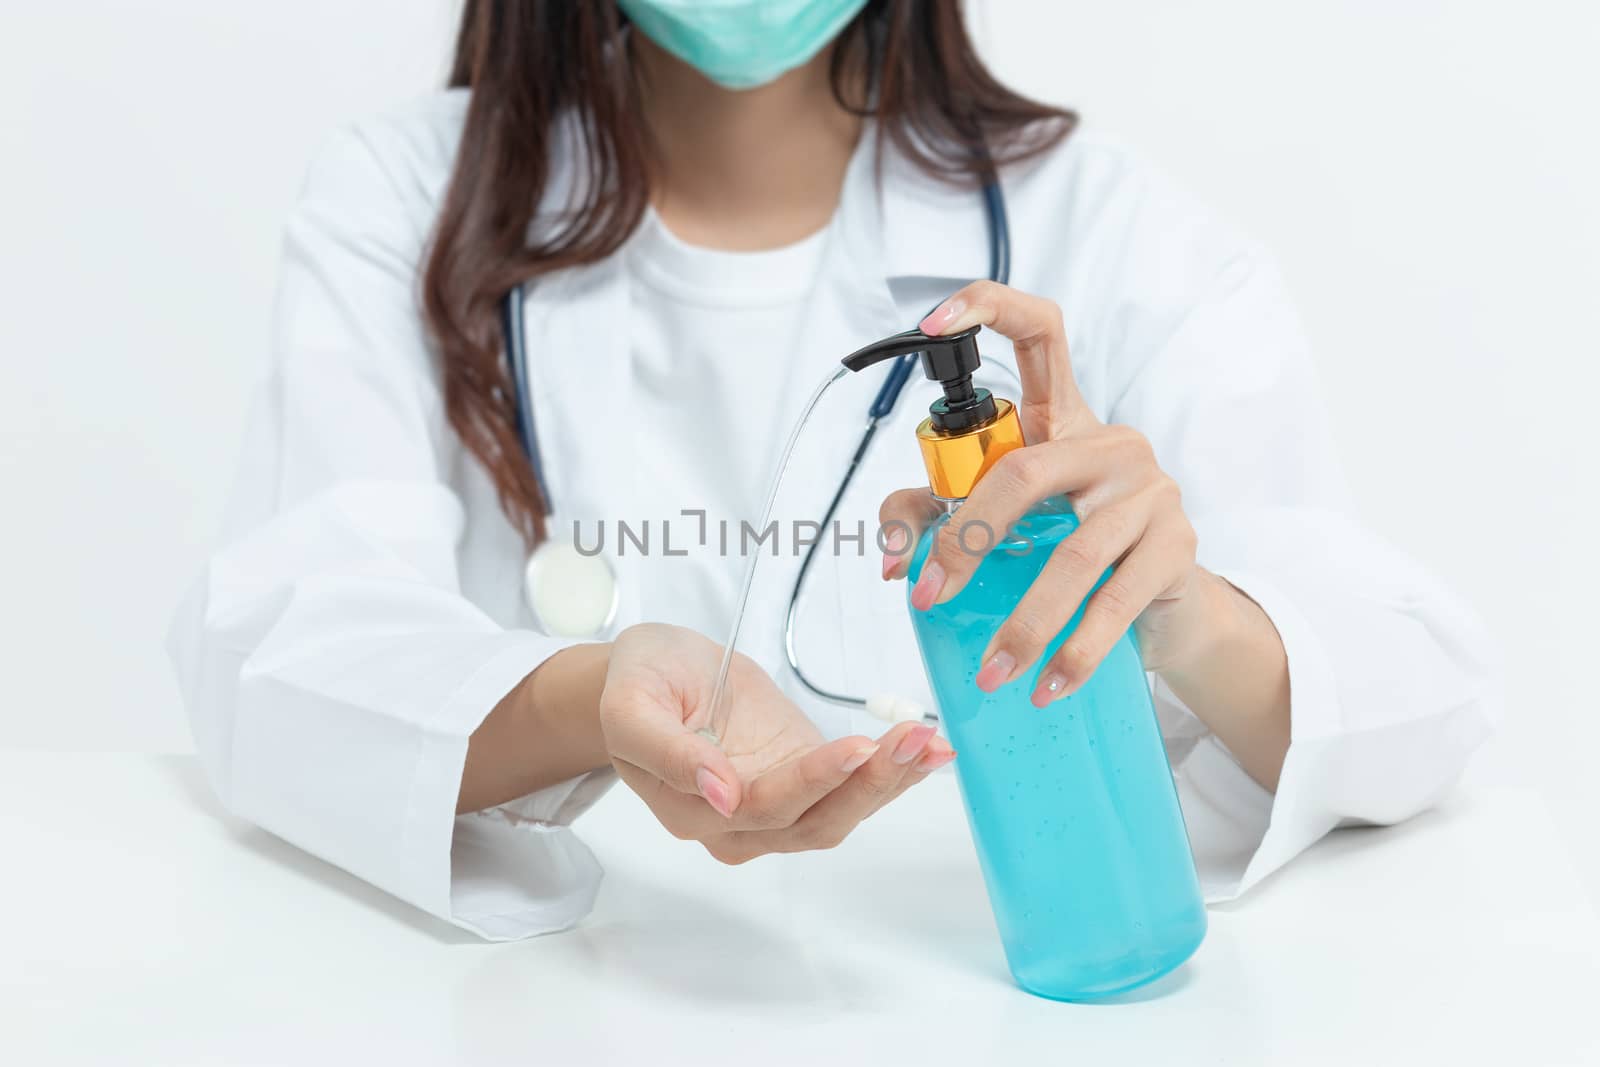 doctor and medical staff washing hand by hand sanitizer alcohol gel for cleaning, hygiene and disinfection, prevent of spreading of germs during infections of COVID-19 Coronavirus outbreak situation